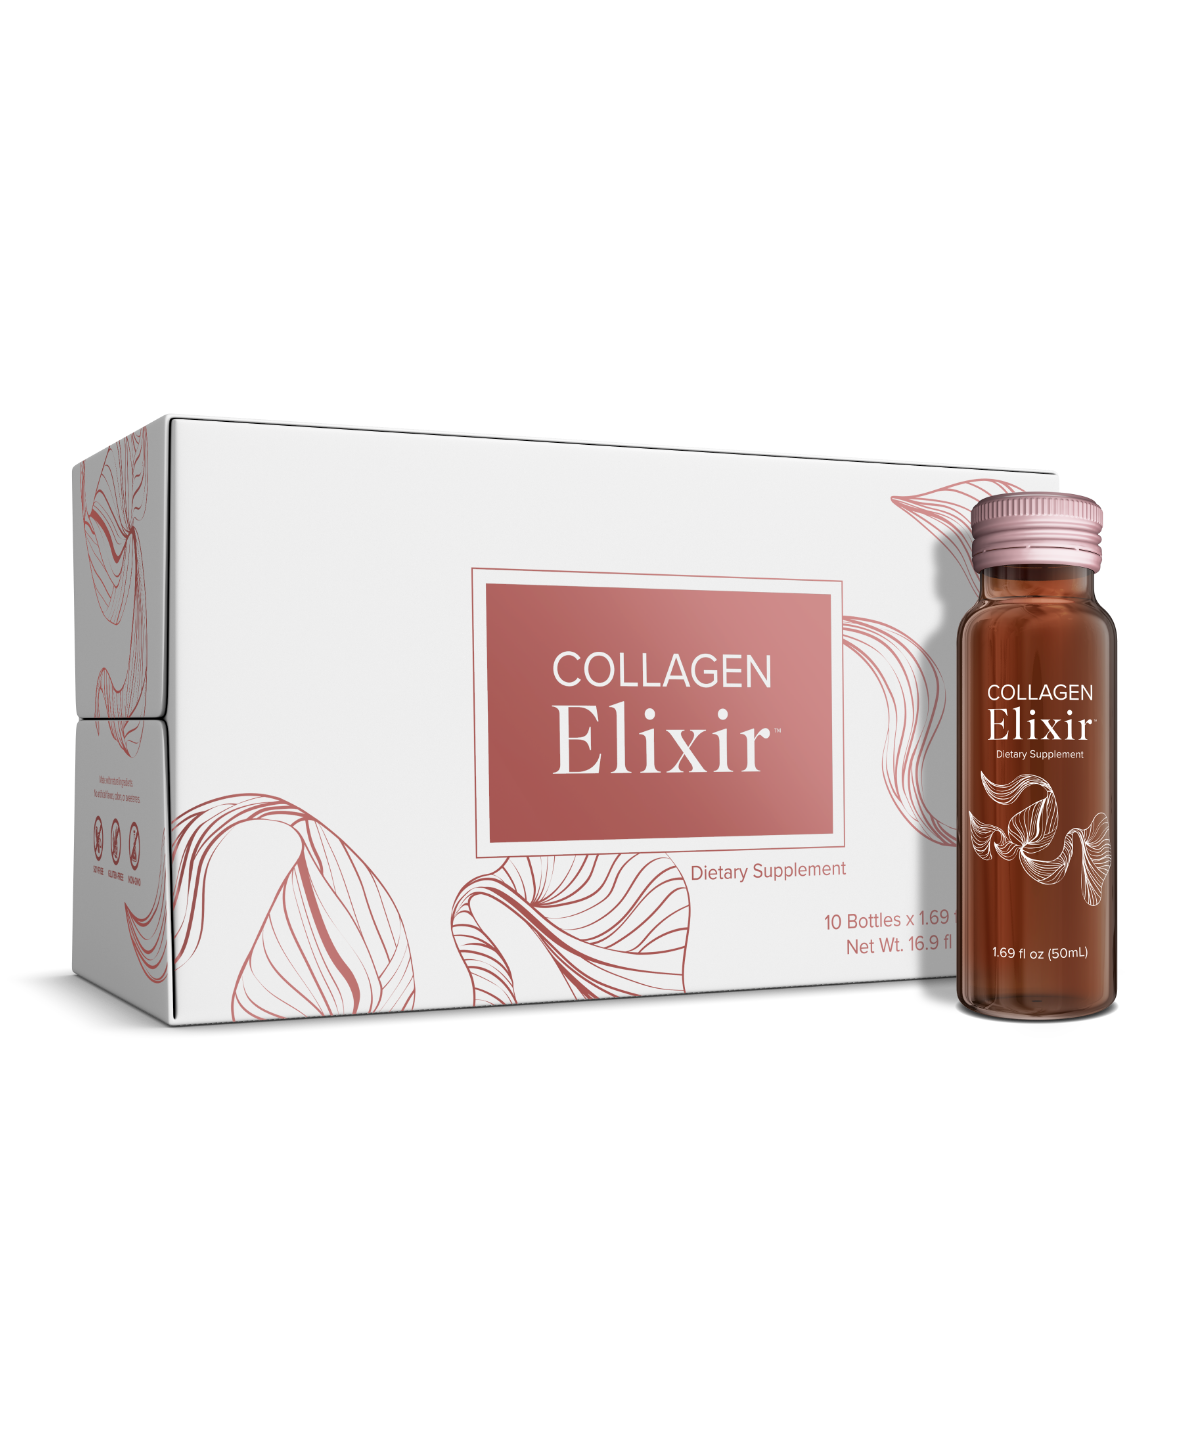 Collagen Elixir - package with 10 bottles of 50ml each